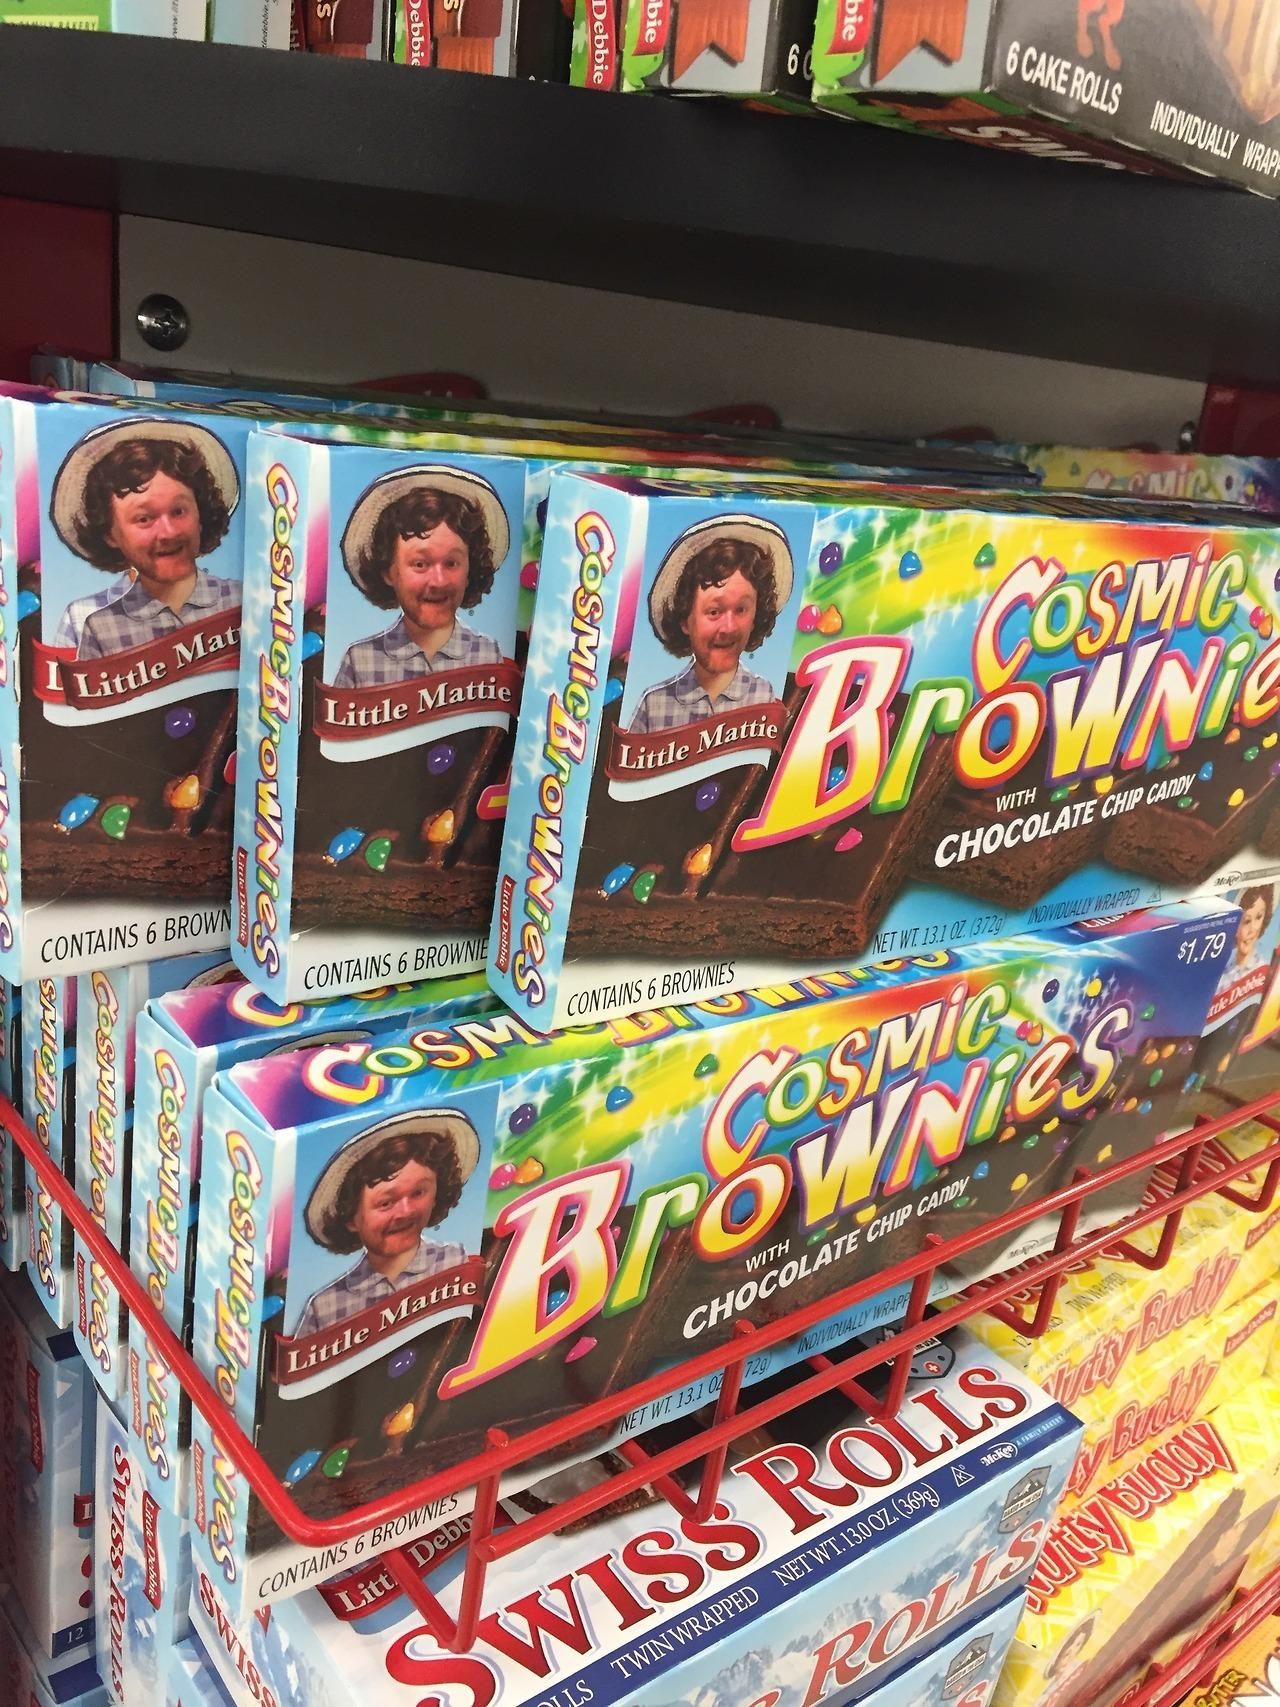 I Photoshopped myself as Little Debbie, and have been putting stickers on actual boxes for a month... http://imgur.com/a/aw00C